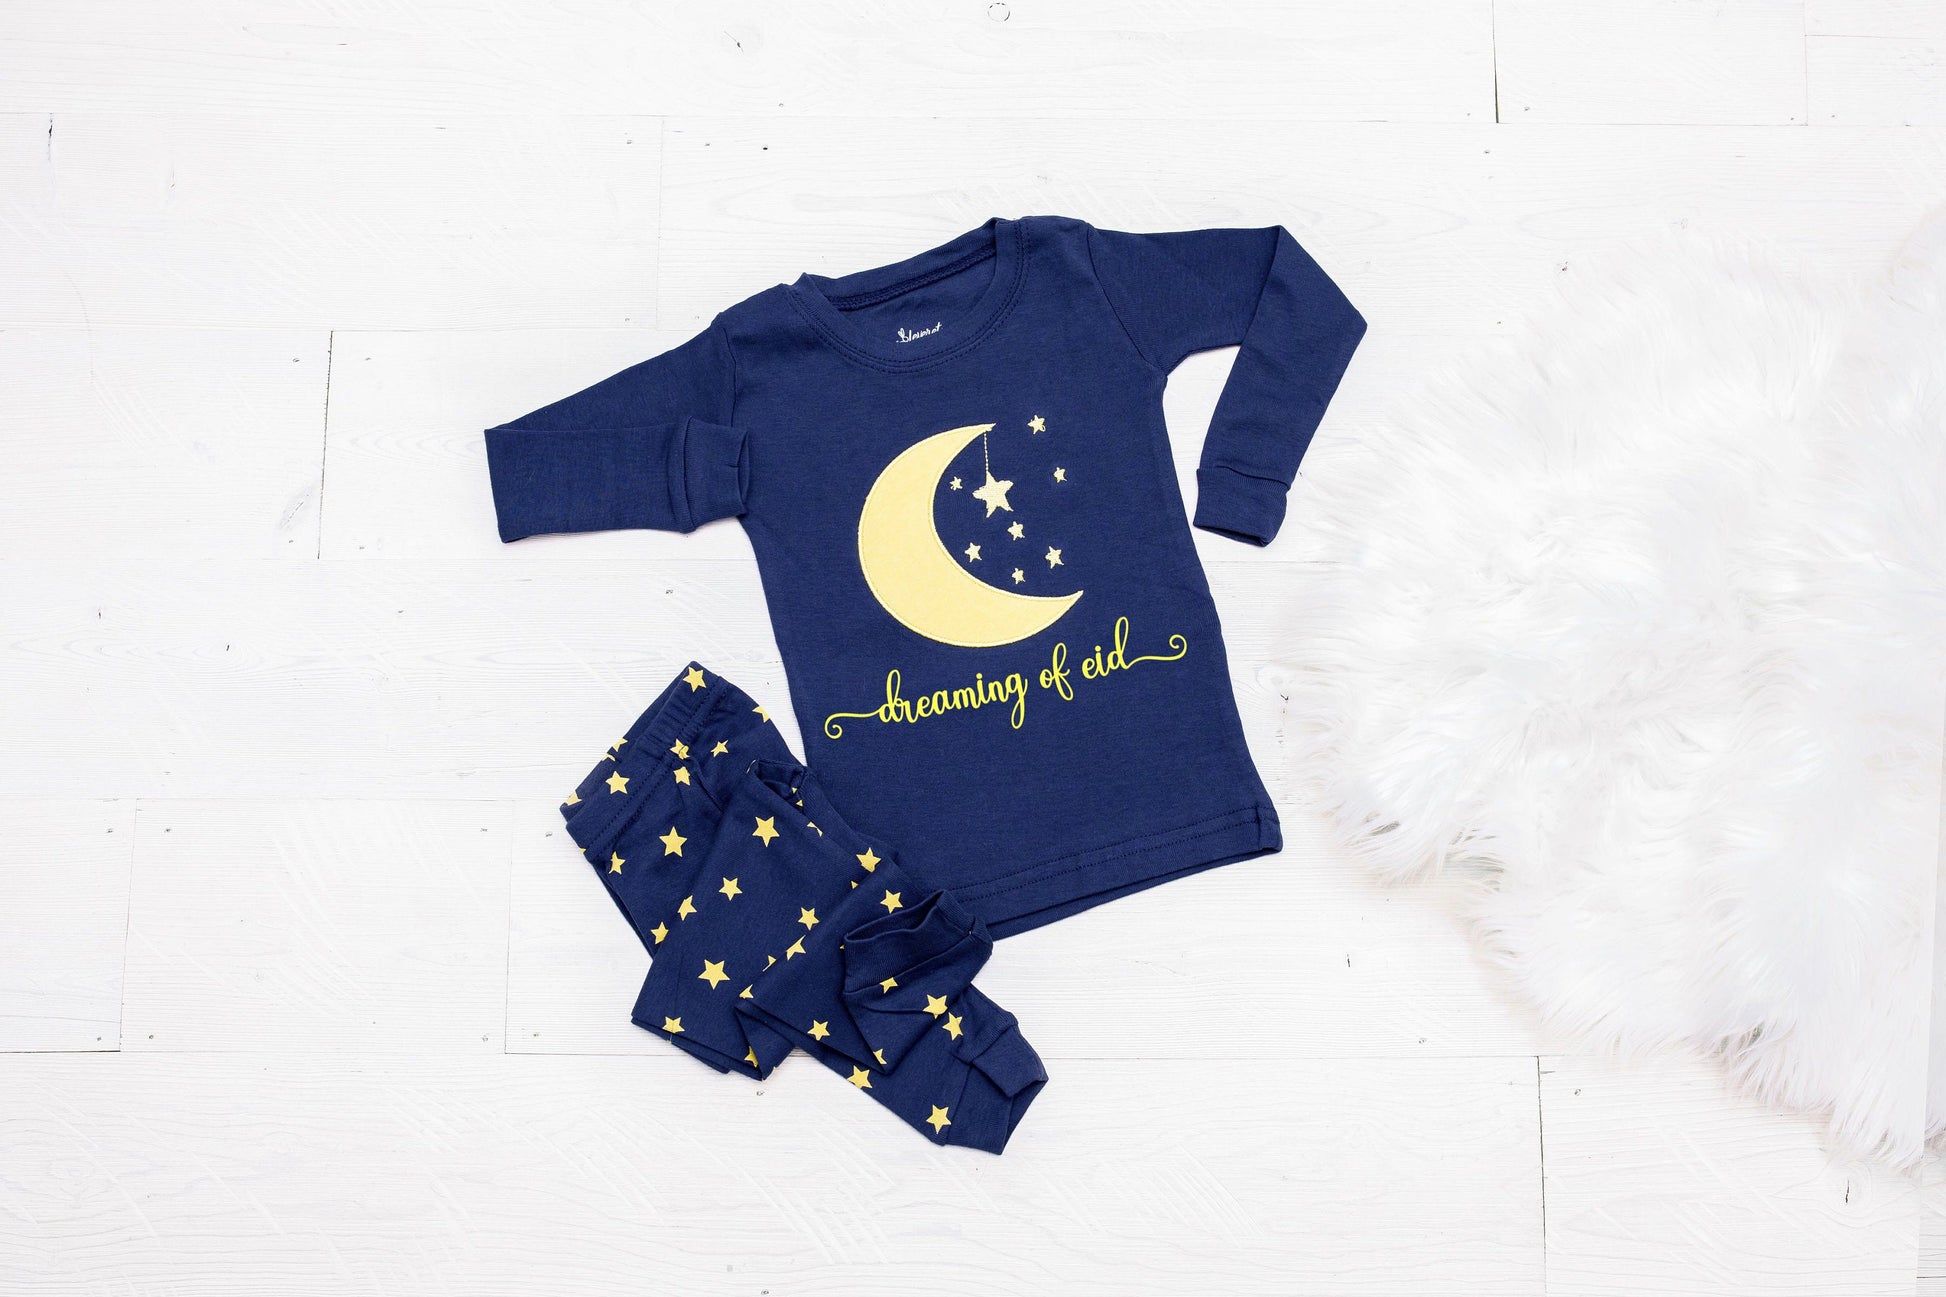 Dreaming of Eid Child and Doll Matching Pajamas -  Kids Eid Pajamas - Eid Mubarak - Eid Gifts - Eid Gifts for Kids - Eid Pajamas for Kids